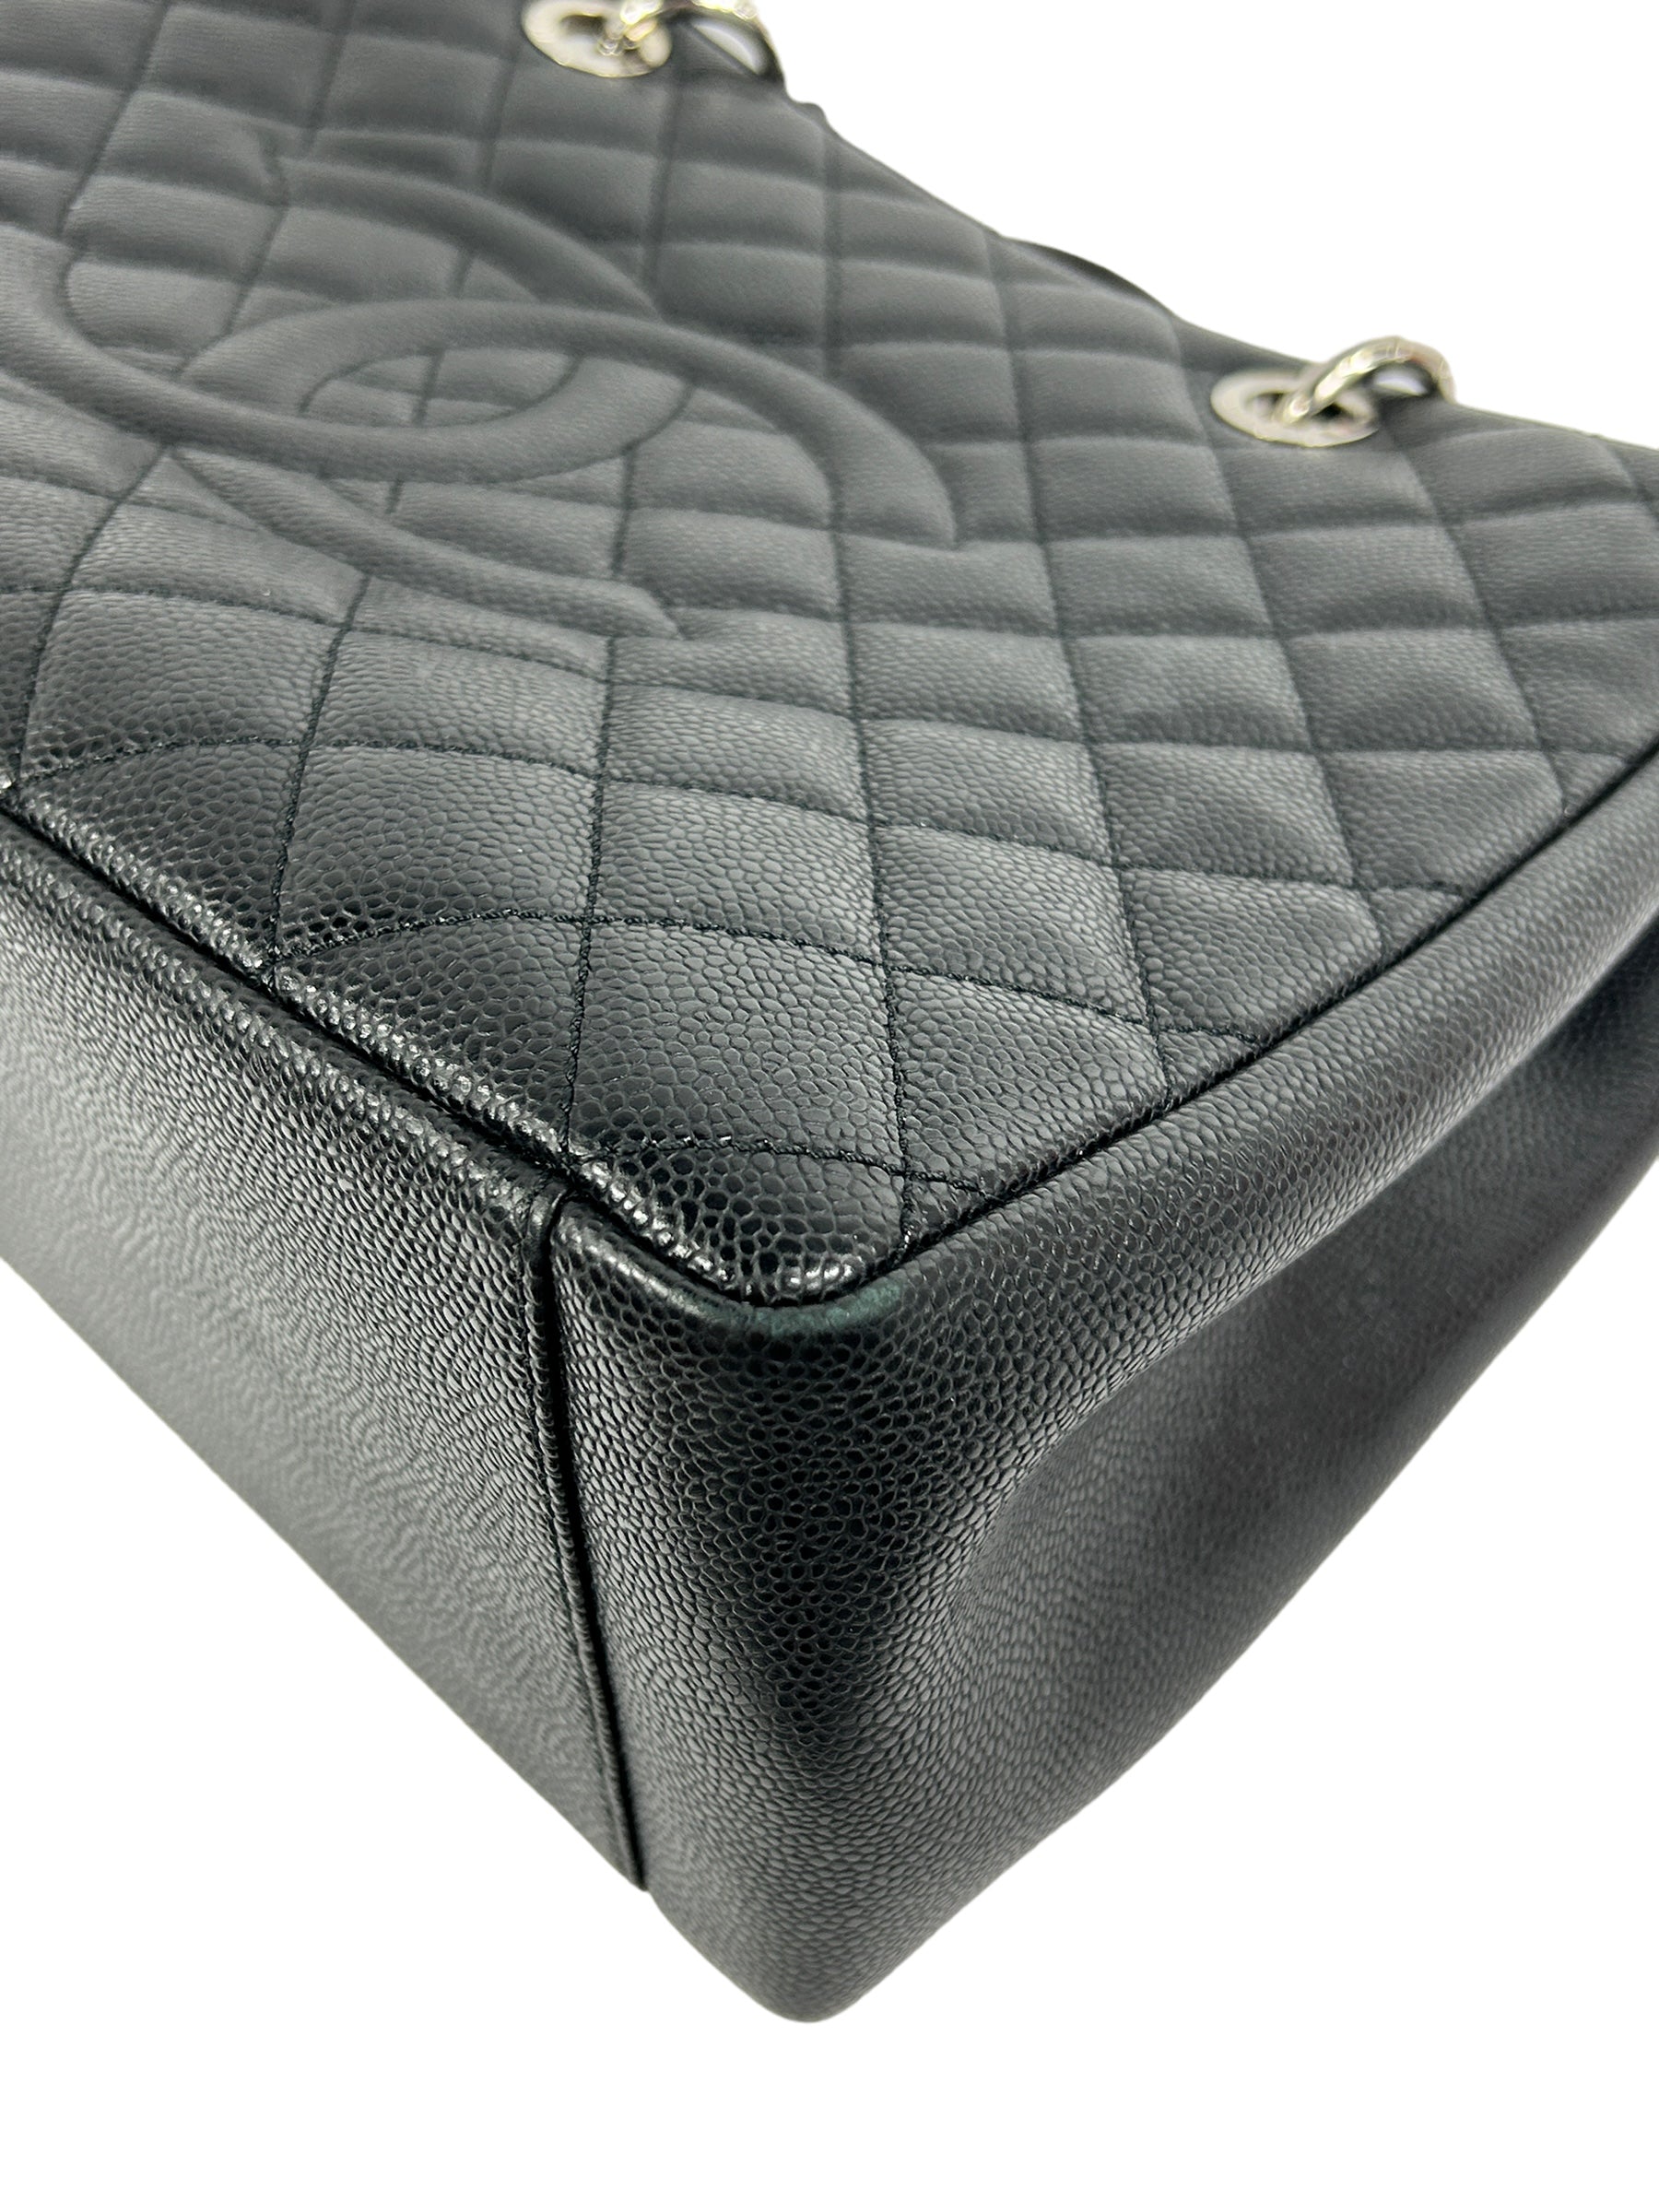 Black Caviar Quilted GST Tote W/SHW